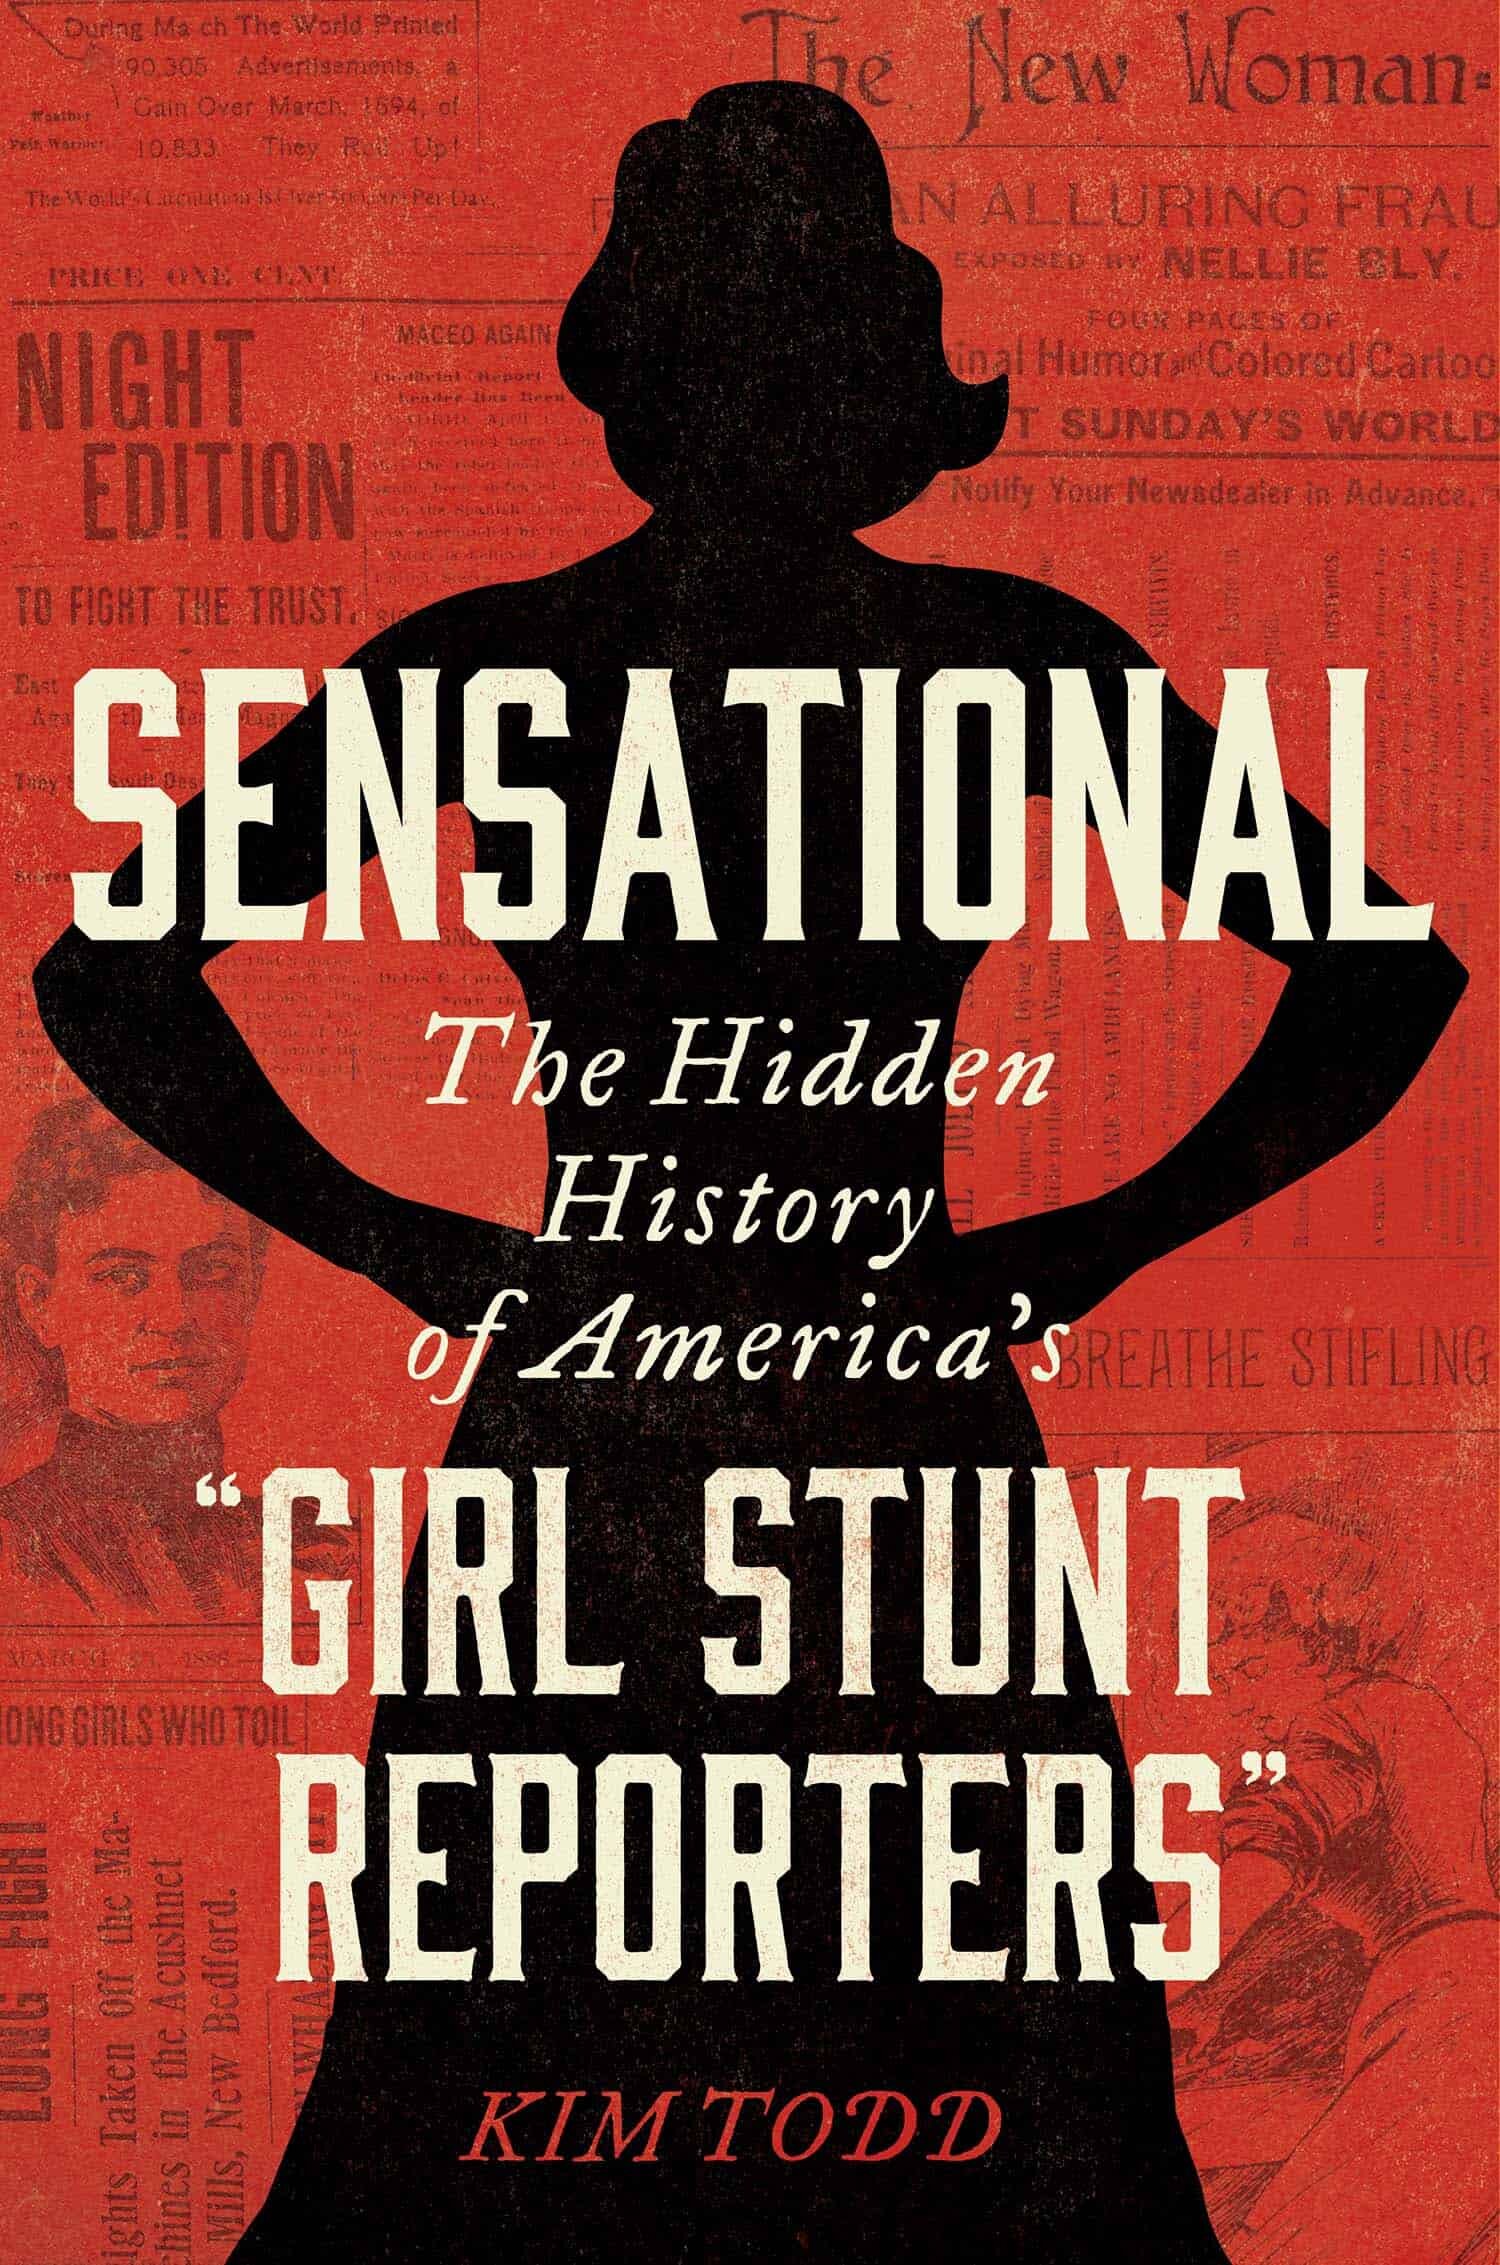 Sensational: The Hidden History of America’s “Girl Stunt Reporters” by Kim Todd